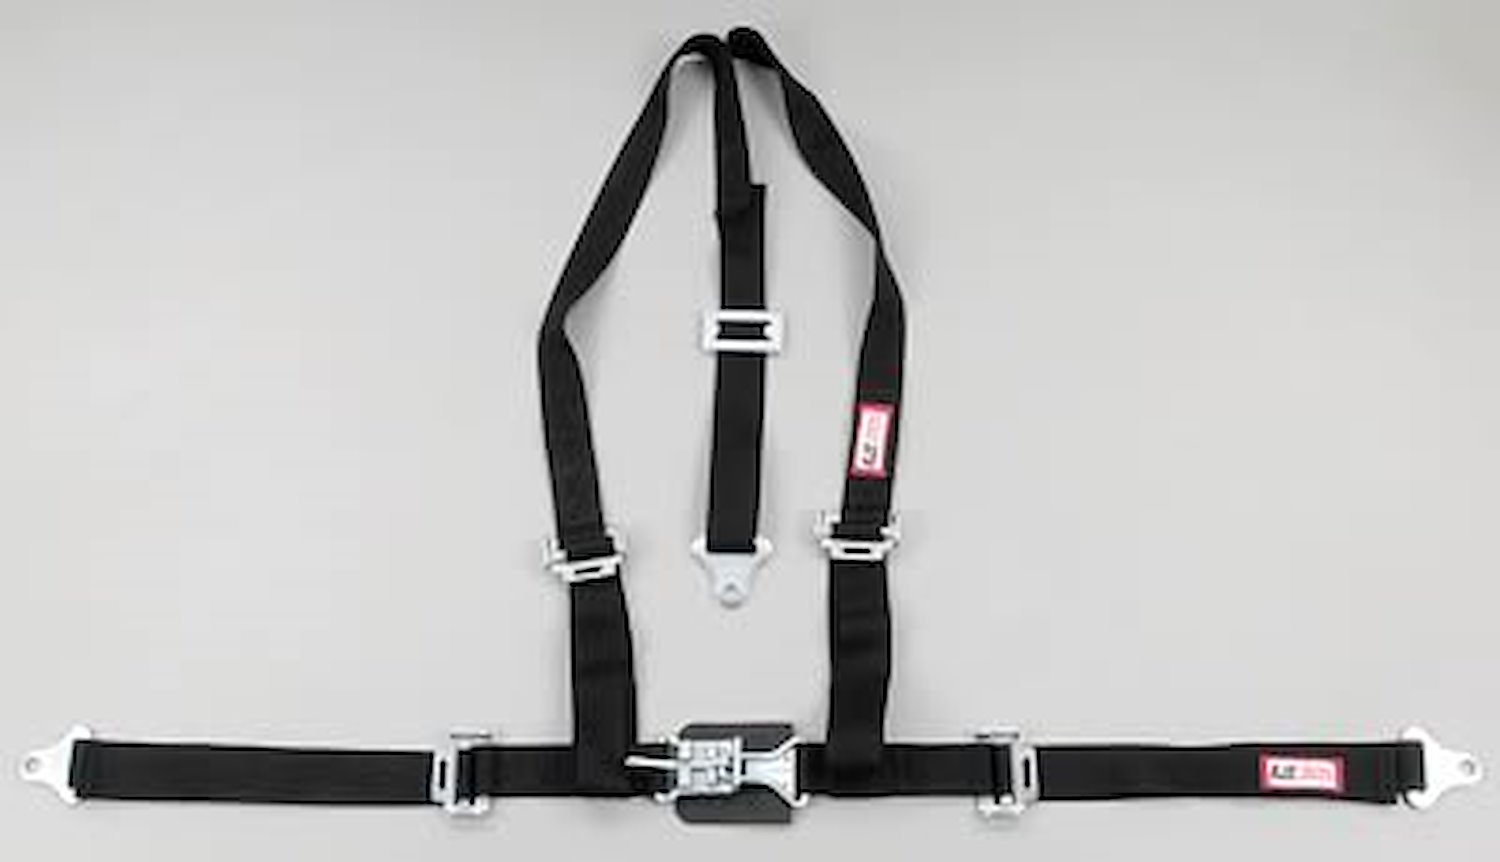 NON-SFI L&L HARNESS 2 PULL DOWN Lap Belt w/adjuster 2 S.H. V ROLL BAR Mount ALL SNAP ENDS GRAY